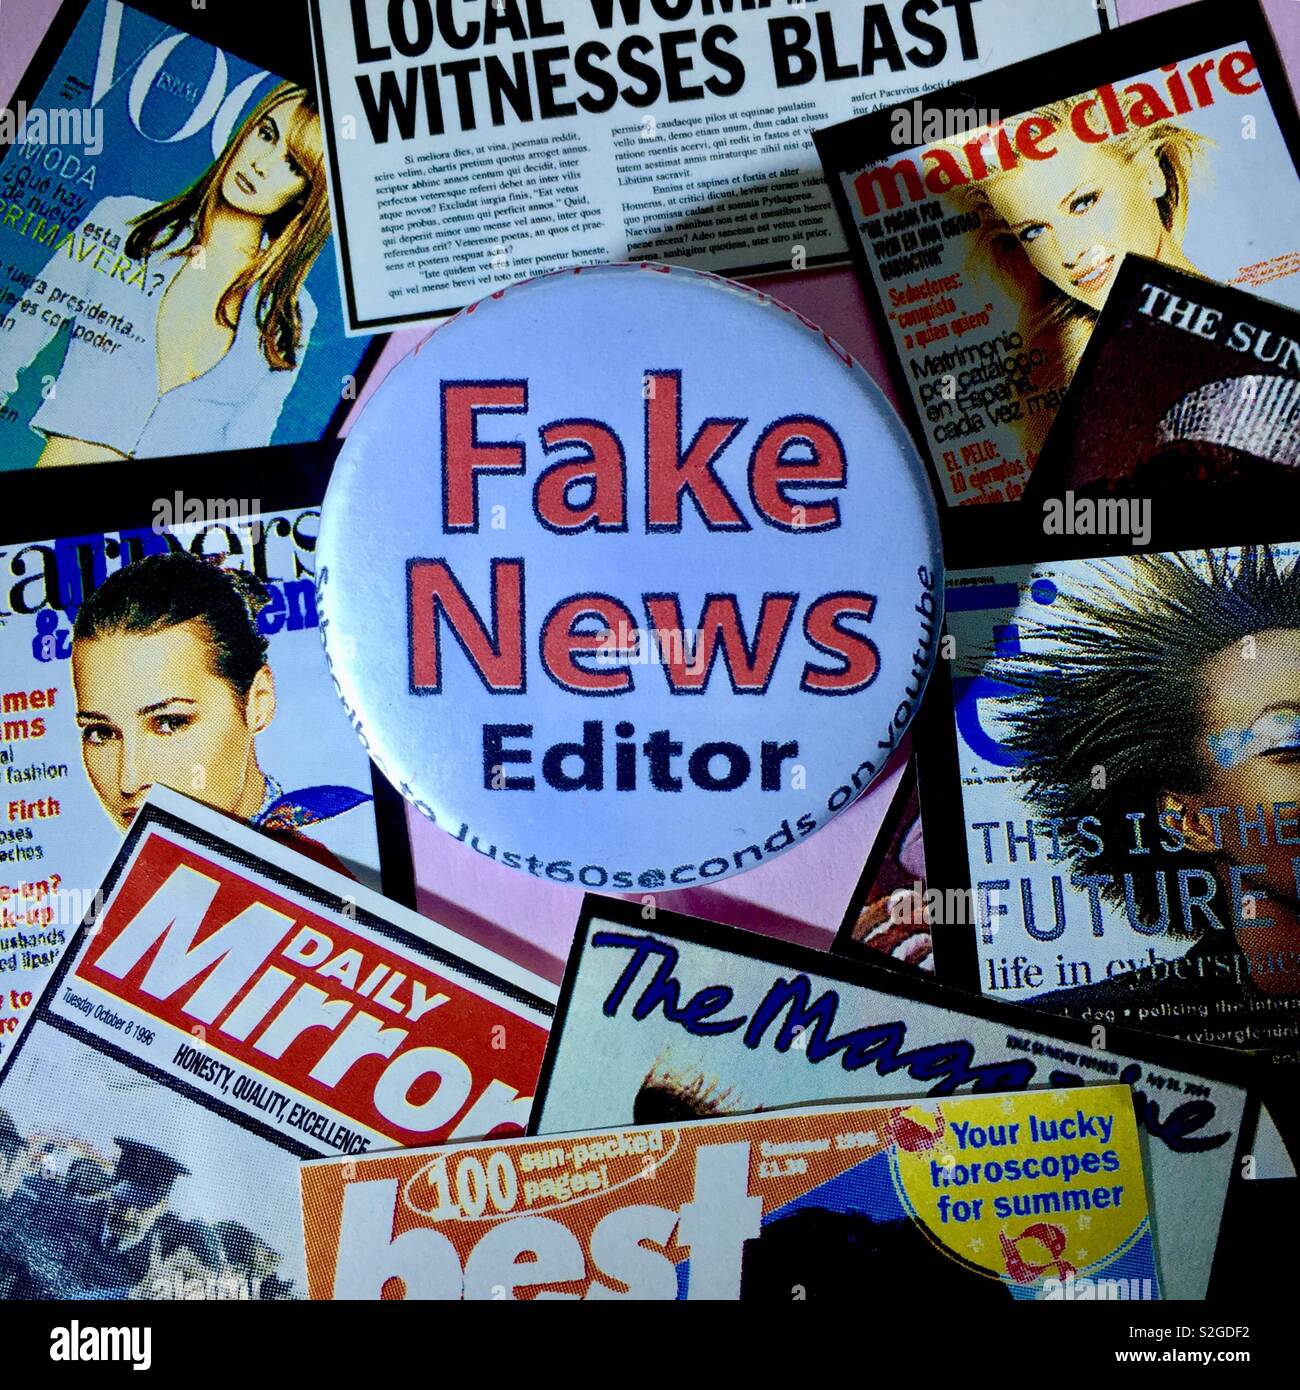 Fake News ‘Editor’s badge, surrounded by publications Stock Photo